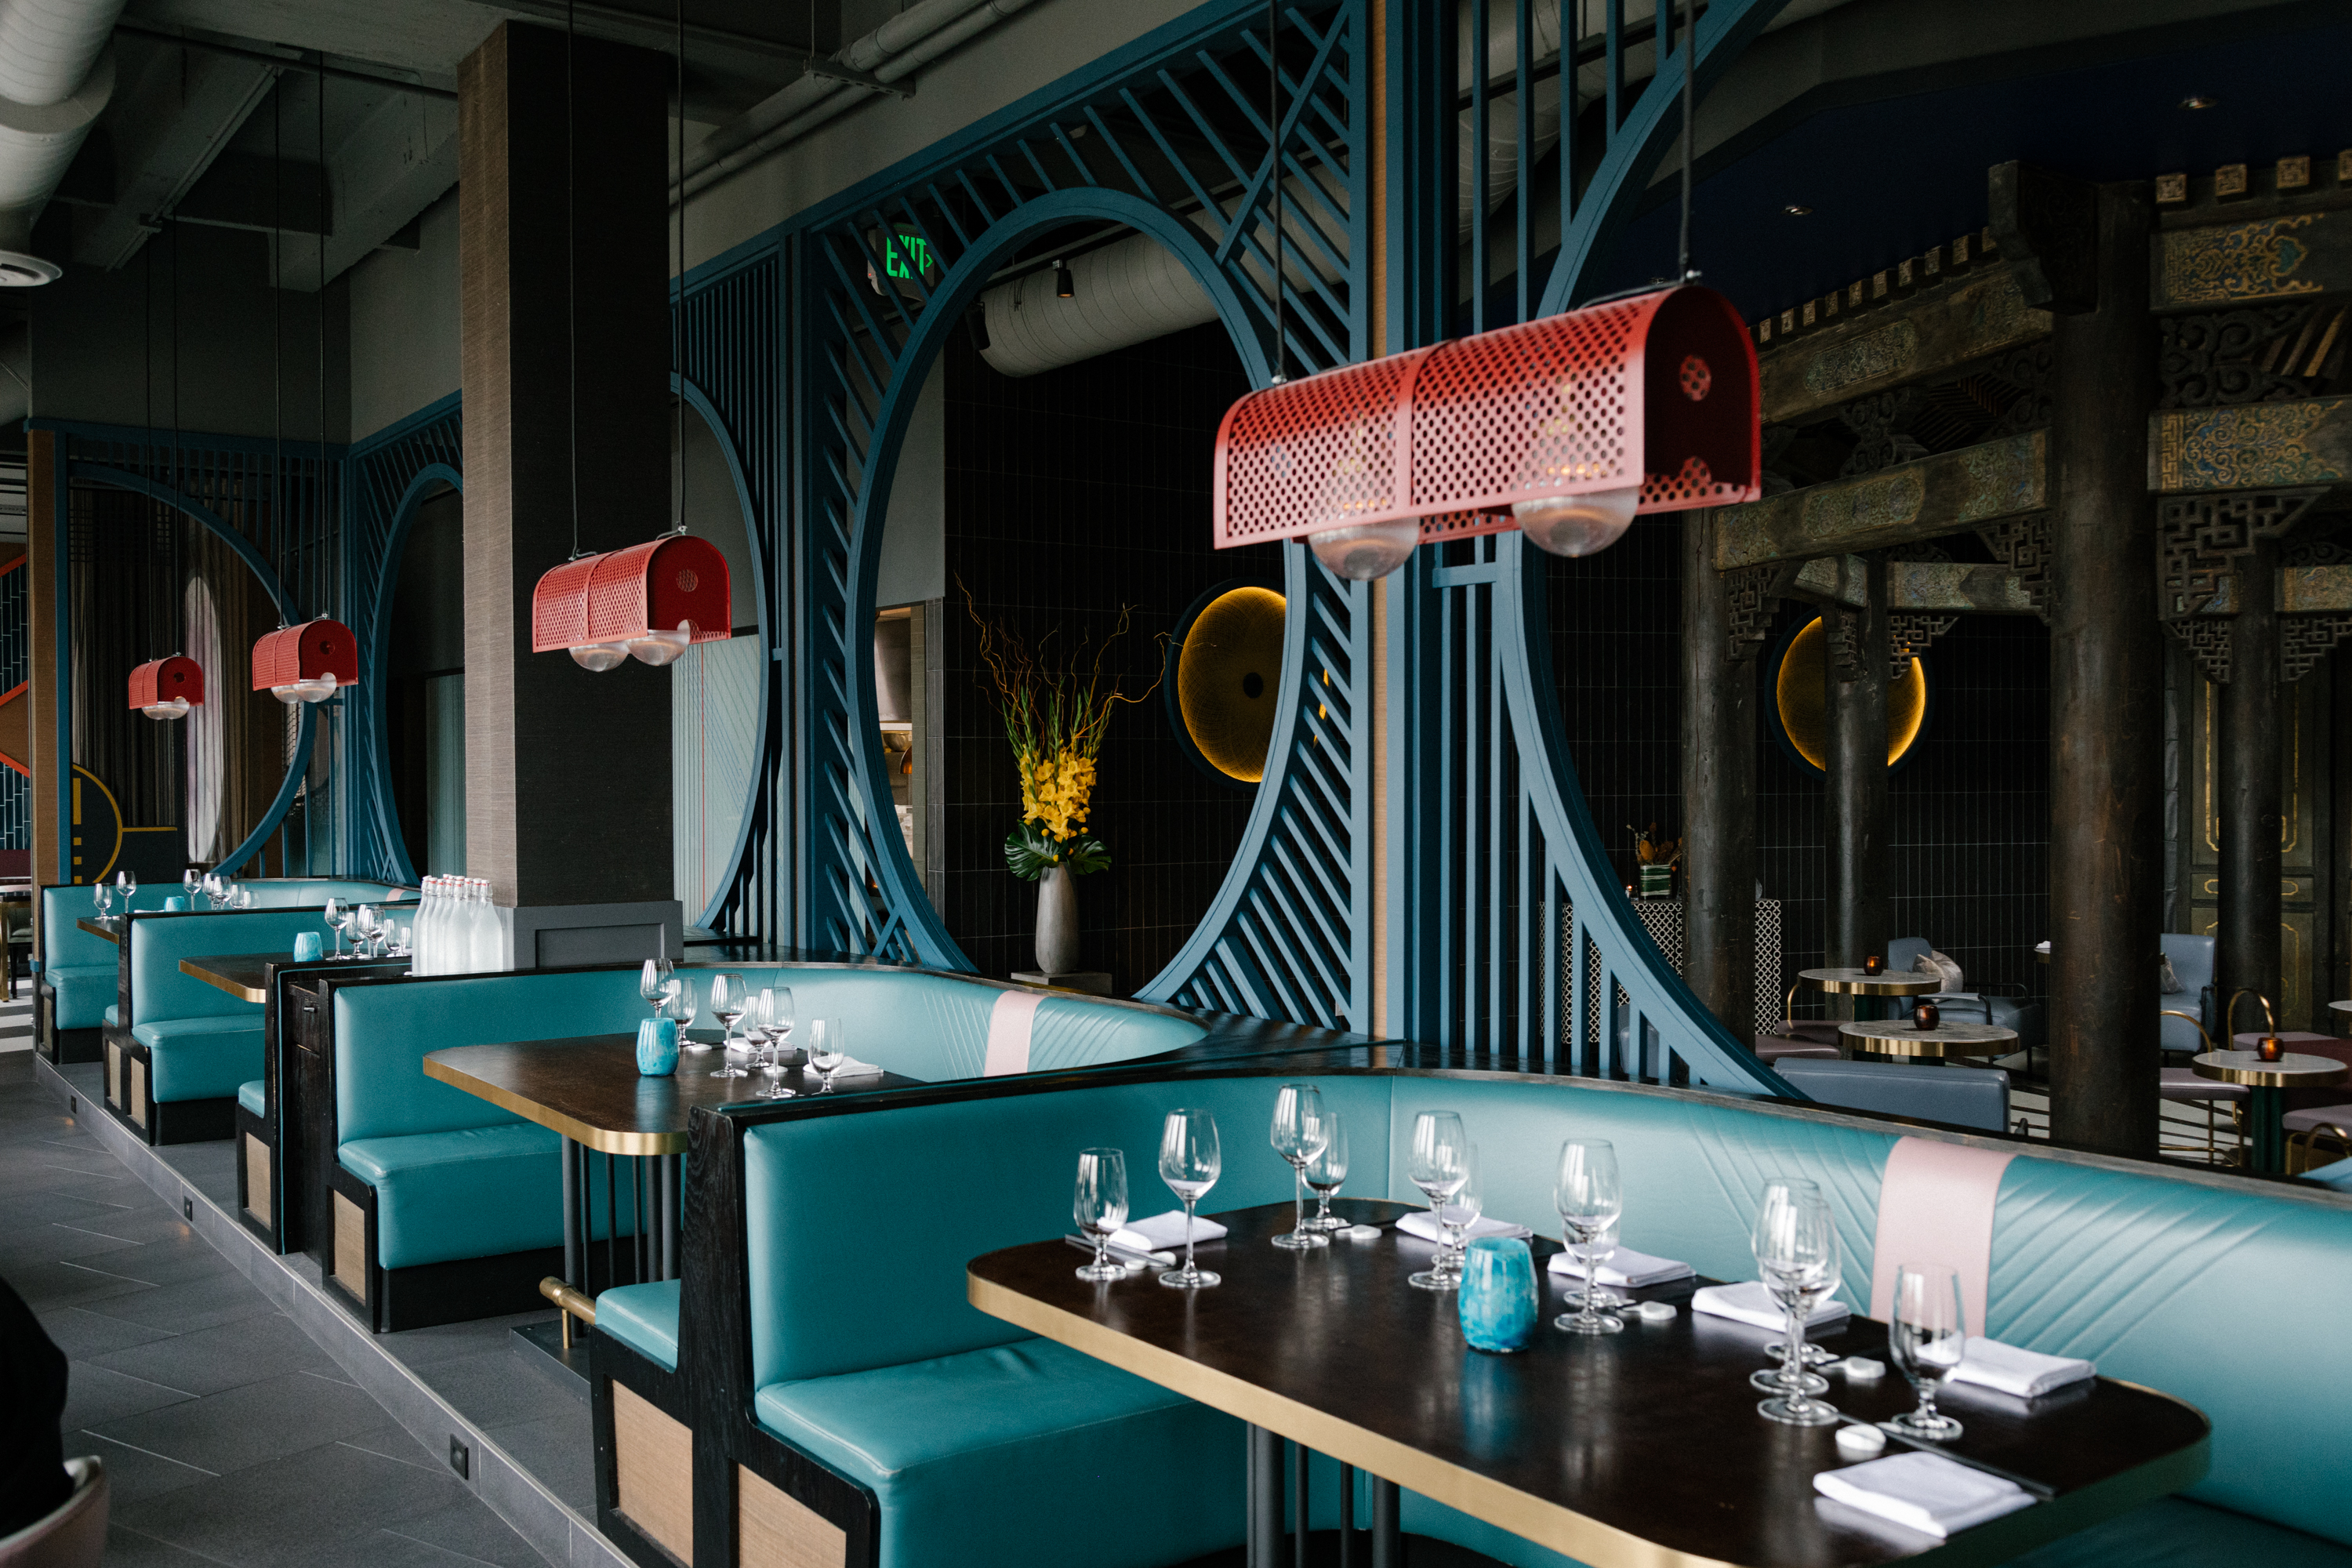 Turquoise booths stand in an elegant Chinese restaurant.